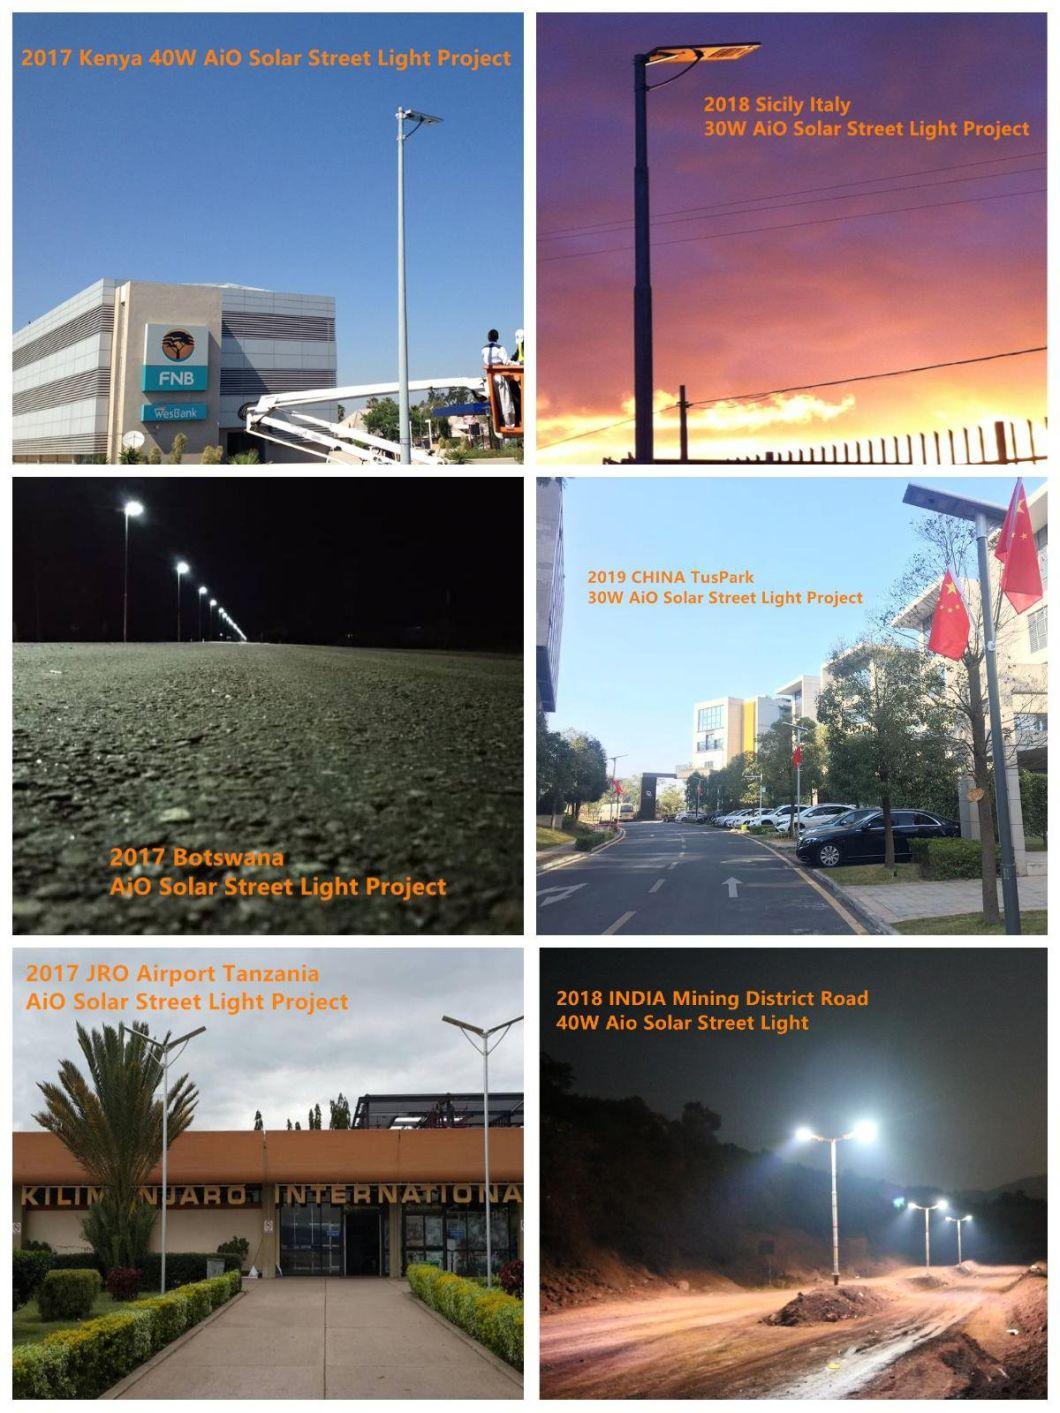 30W All in One Integrated LED Solar Street Light for Government Solar Lighting Project